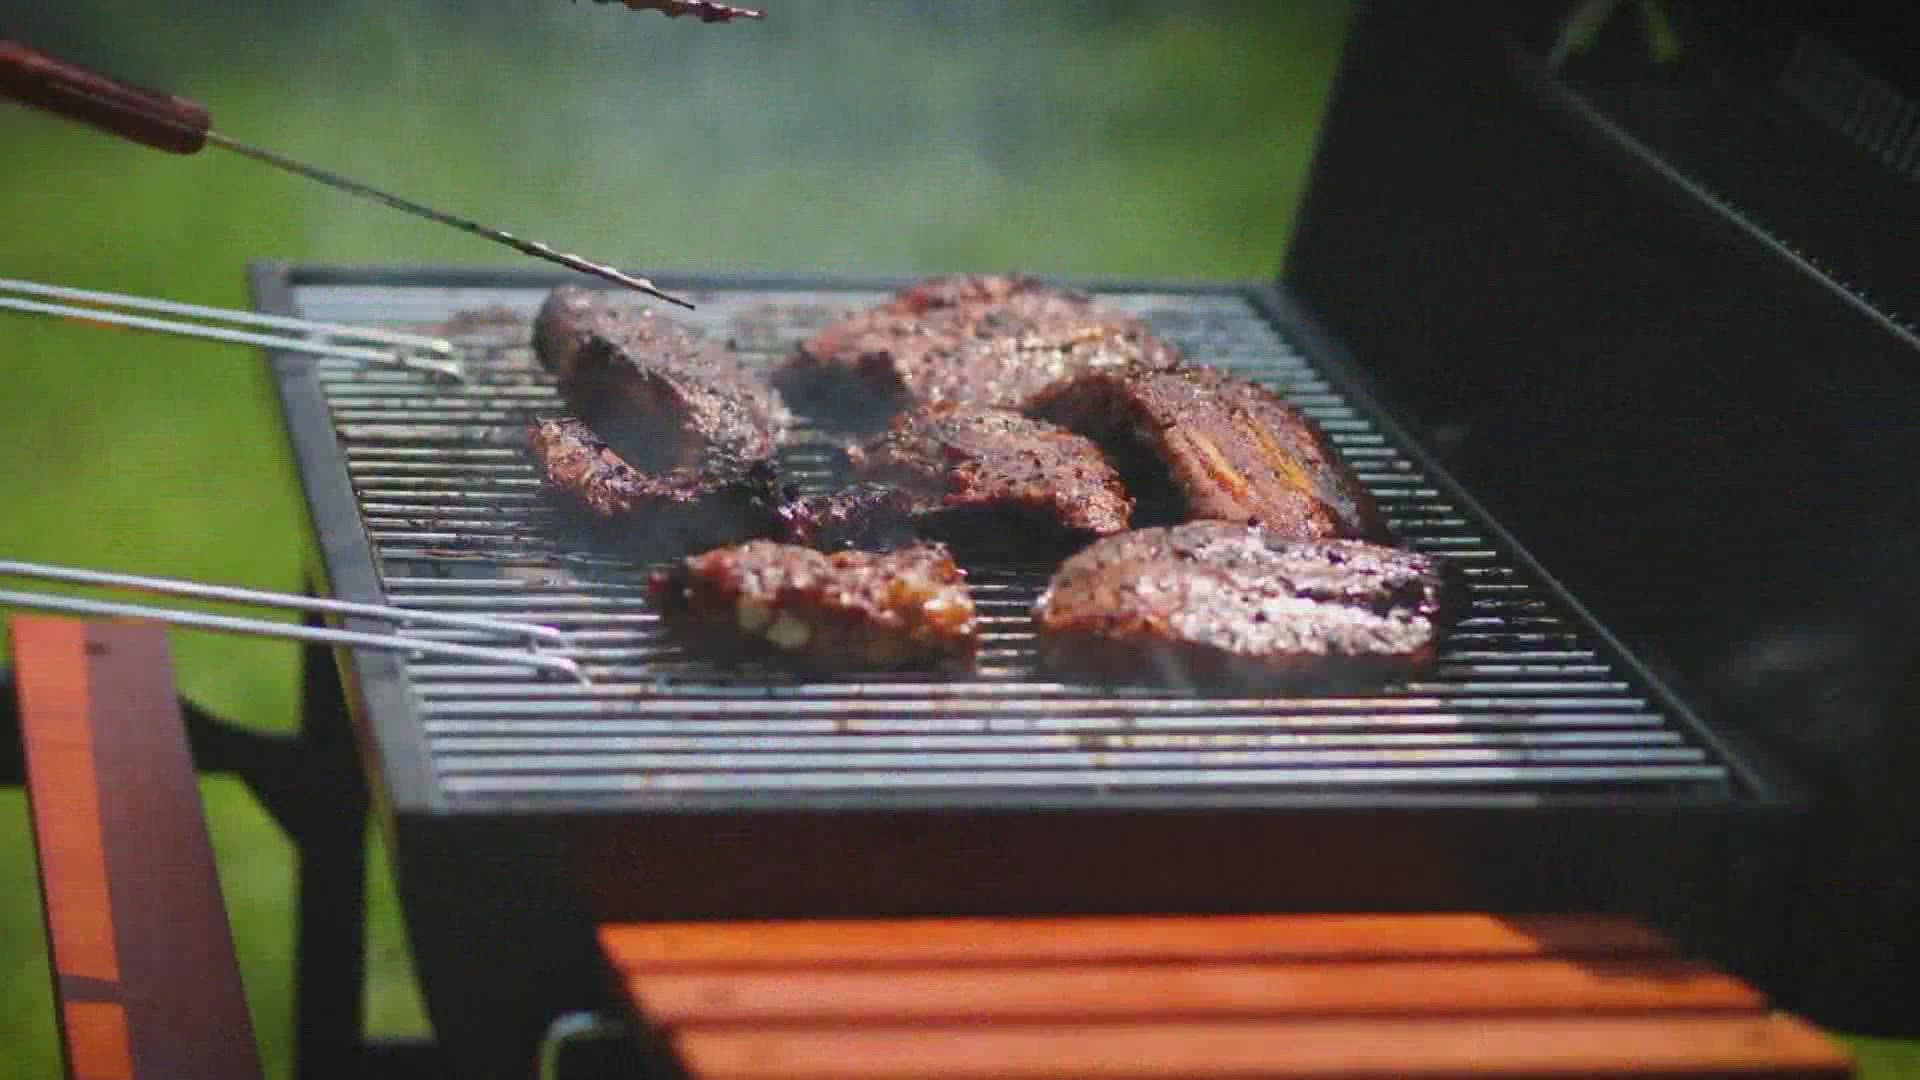 Doctors with UofL Health said they see an uptick in injuries around holiday weekend in the summer because of simple mistakes made around the grill.